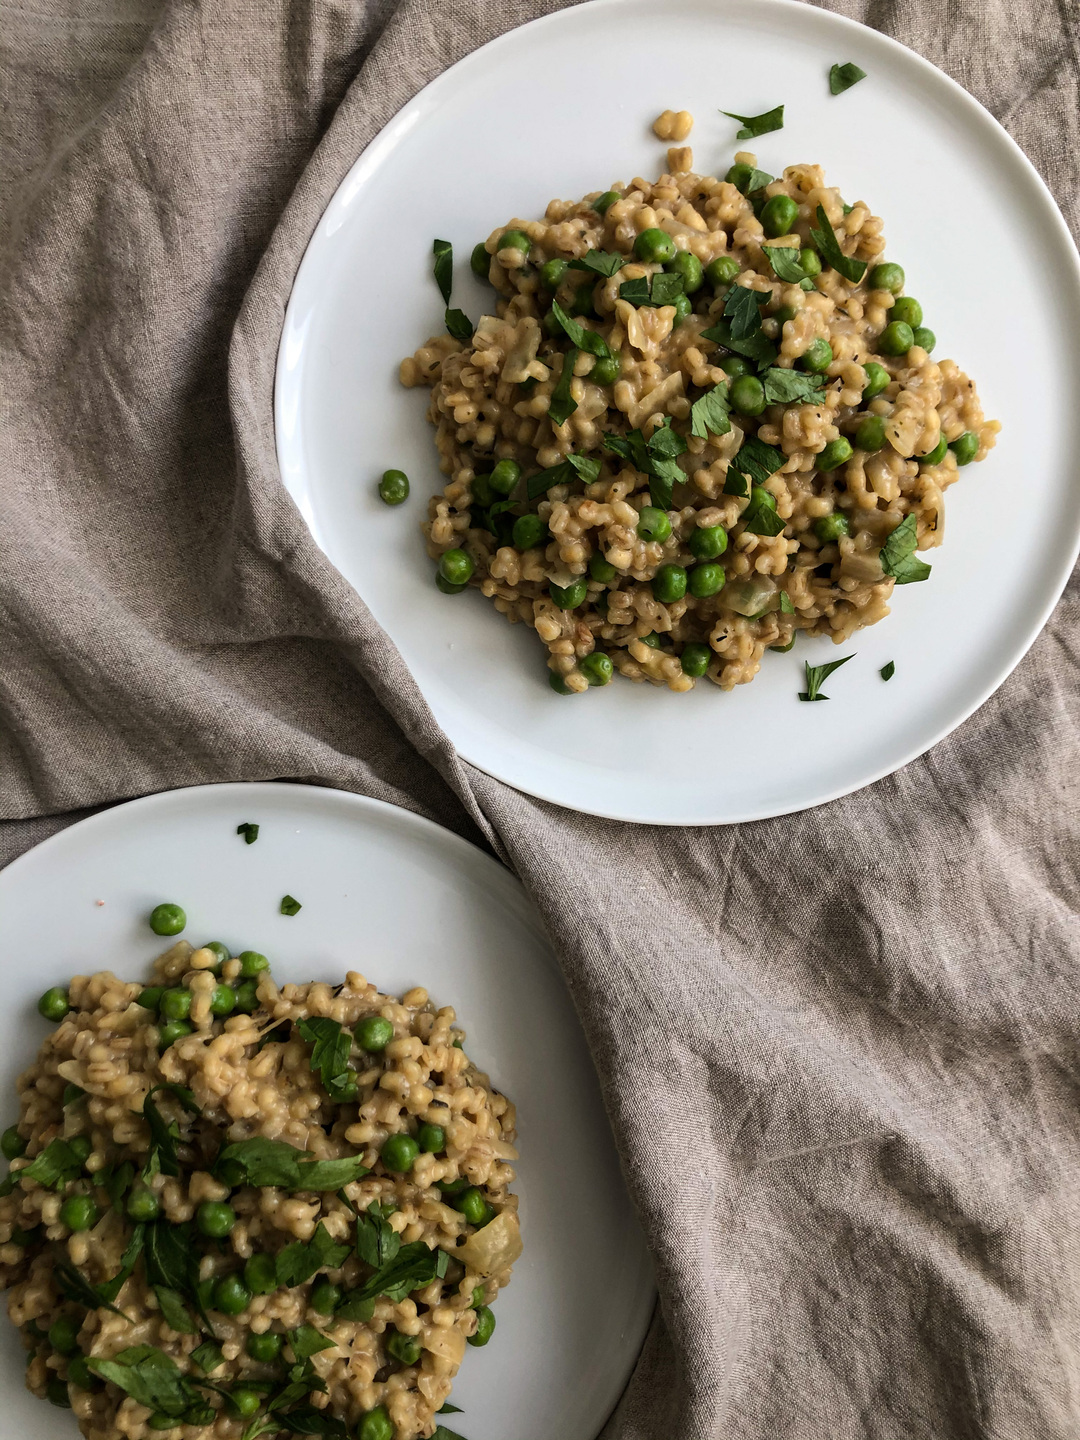 barley risotto with garden peas and roasted garlic